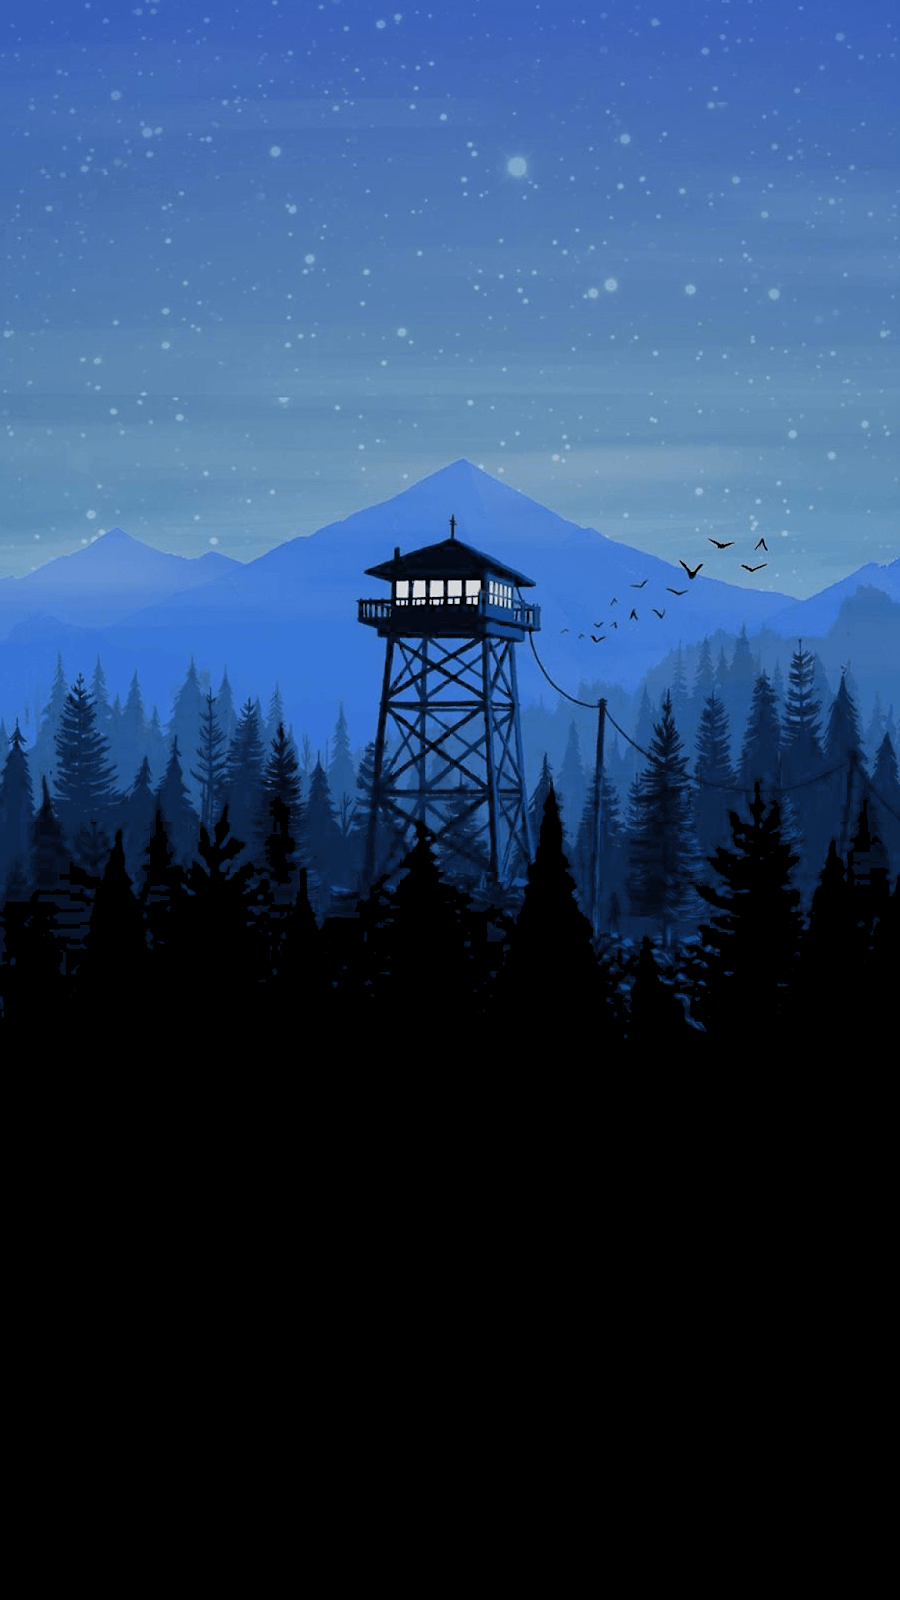 Another Firewatch Wallpaper (for Amoled display). Scenery